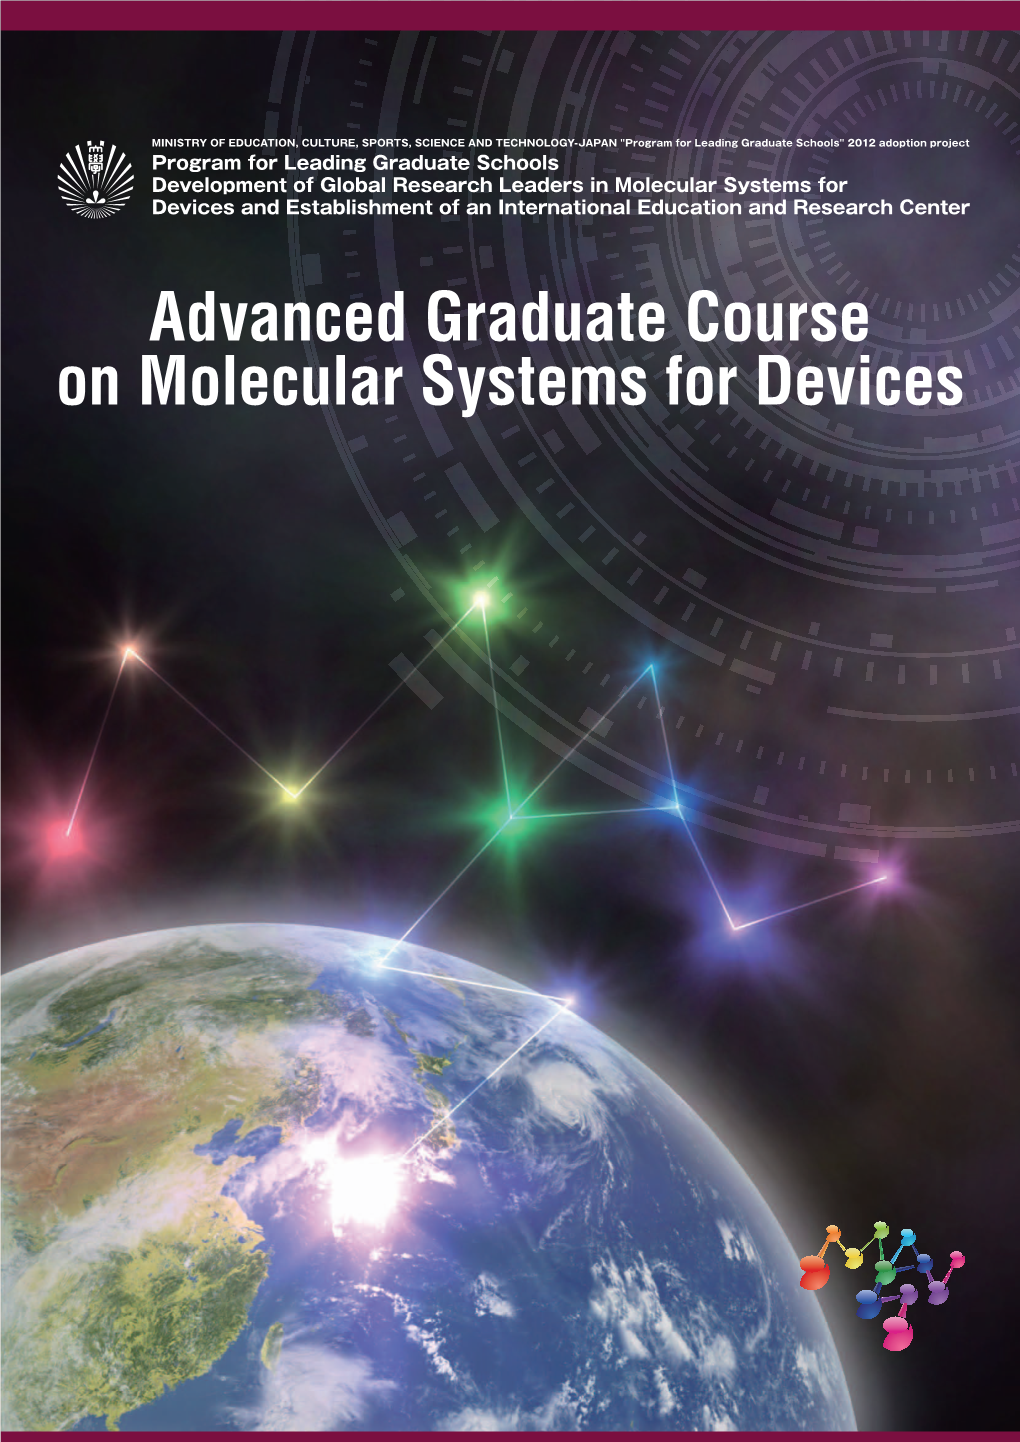 Advanced Graduate Course on Molecular Systems for Devices